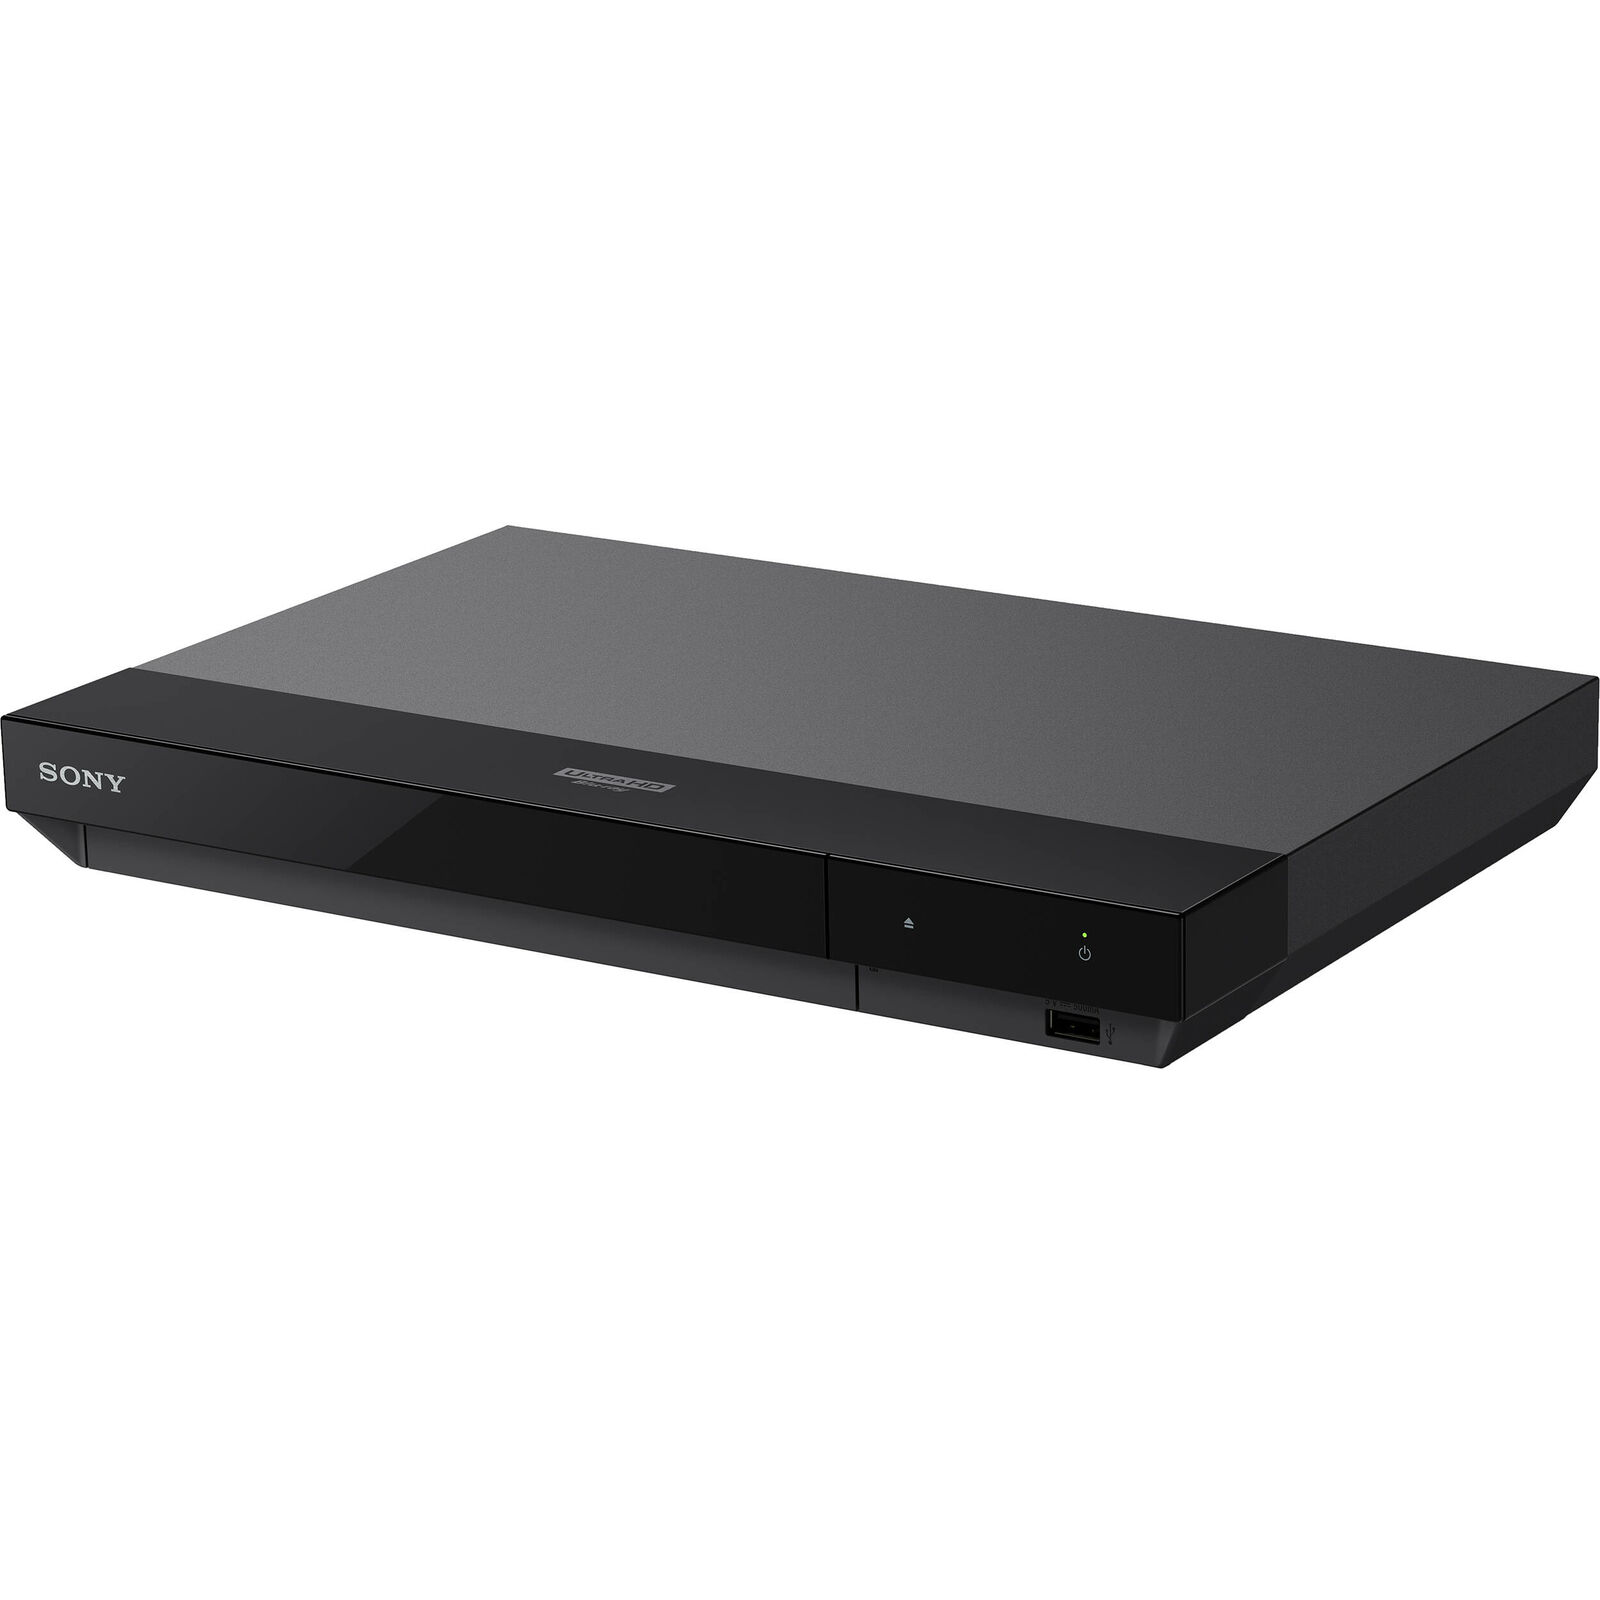 Sony 4K Ultra HD Smart Blu-ray Player with Wi-Fi for Streaming Video *UBPX700M